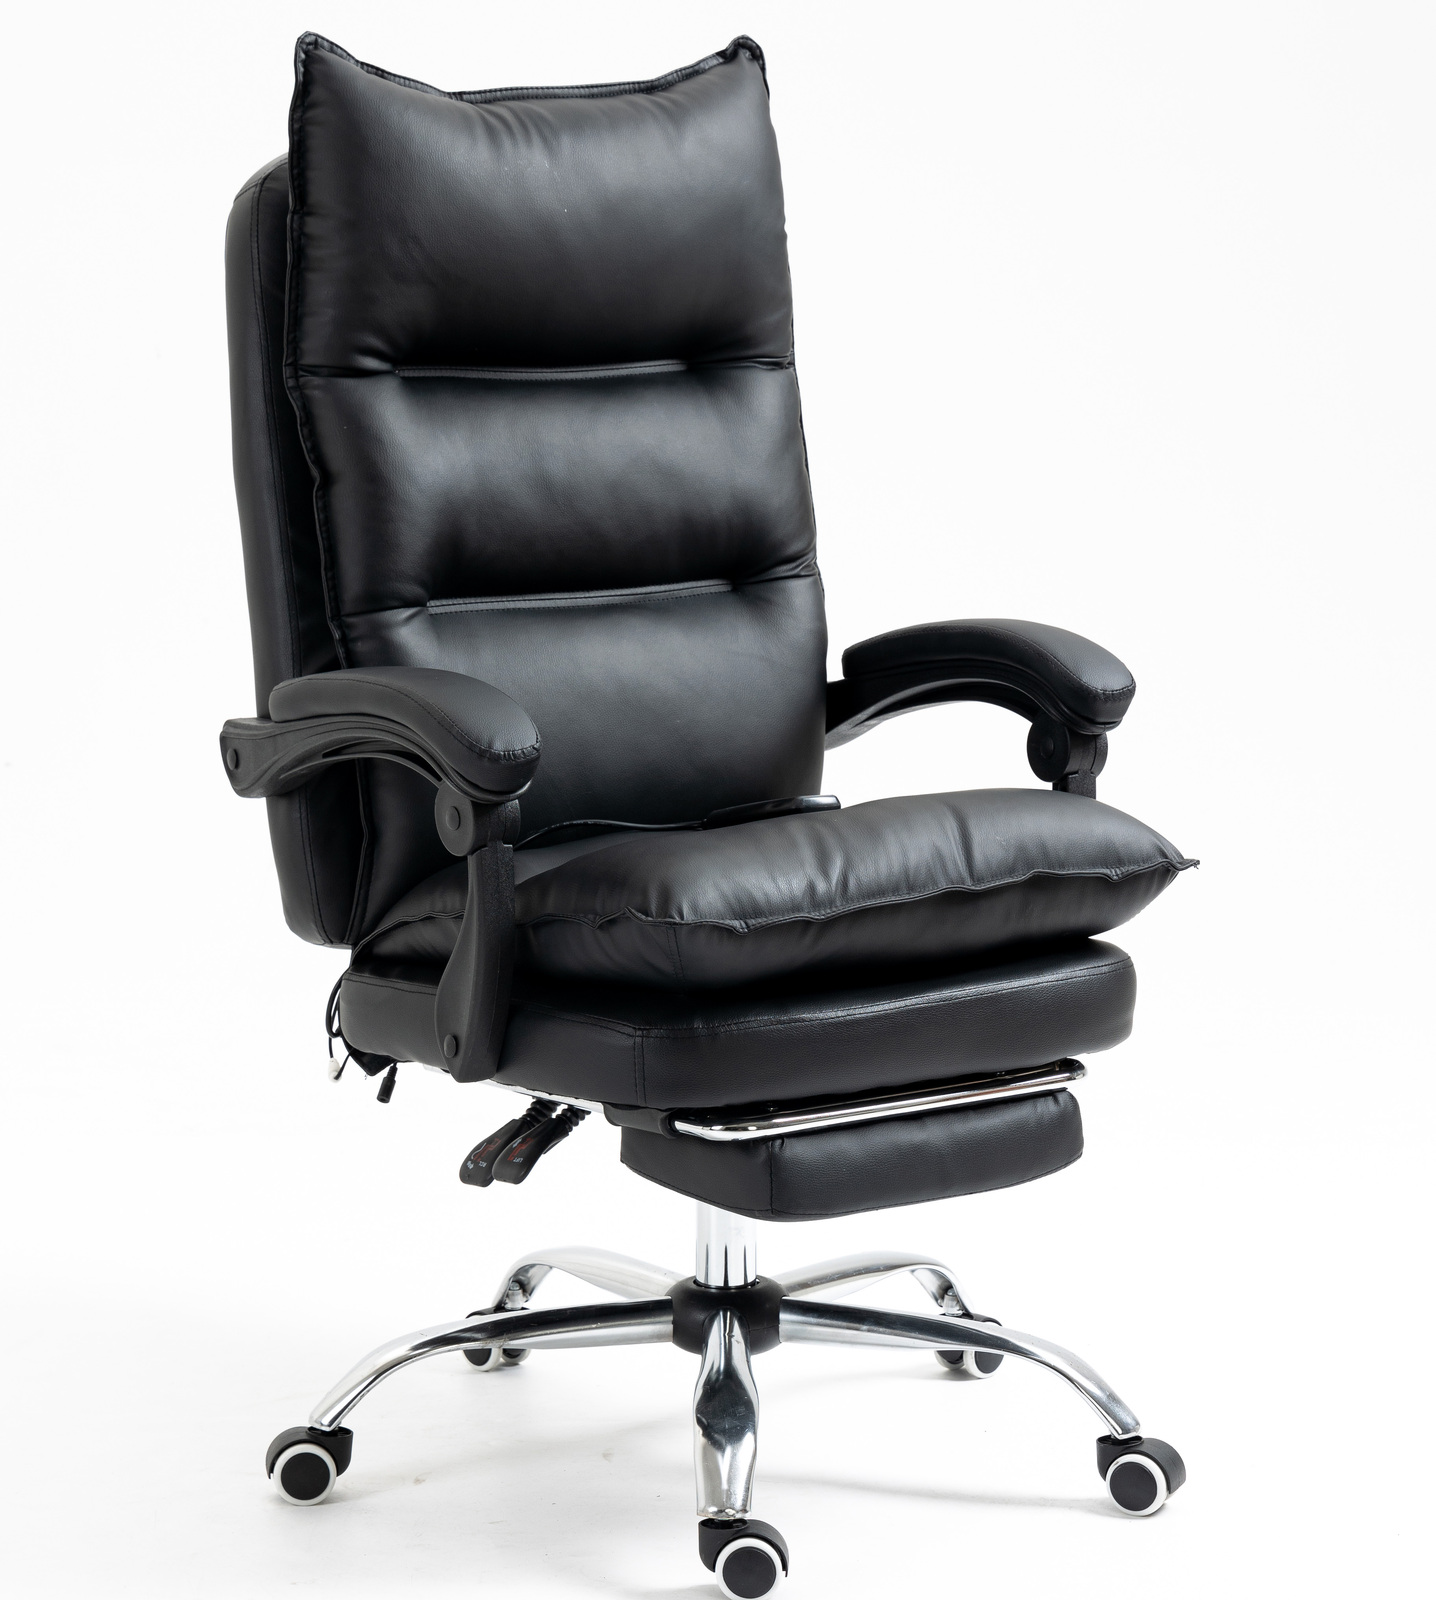 Chieftain Deluxe Plush Executive Reclining Office Chair with Foot Rest (Black)